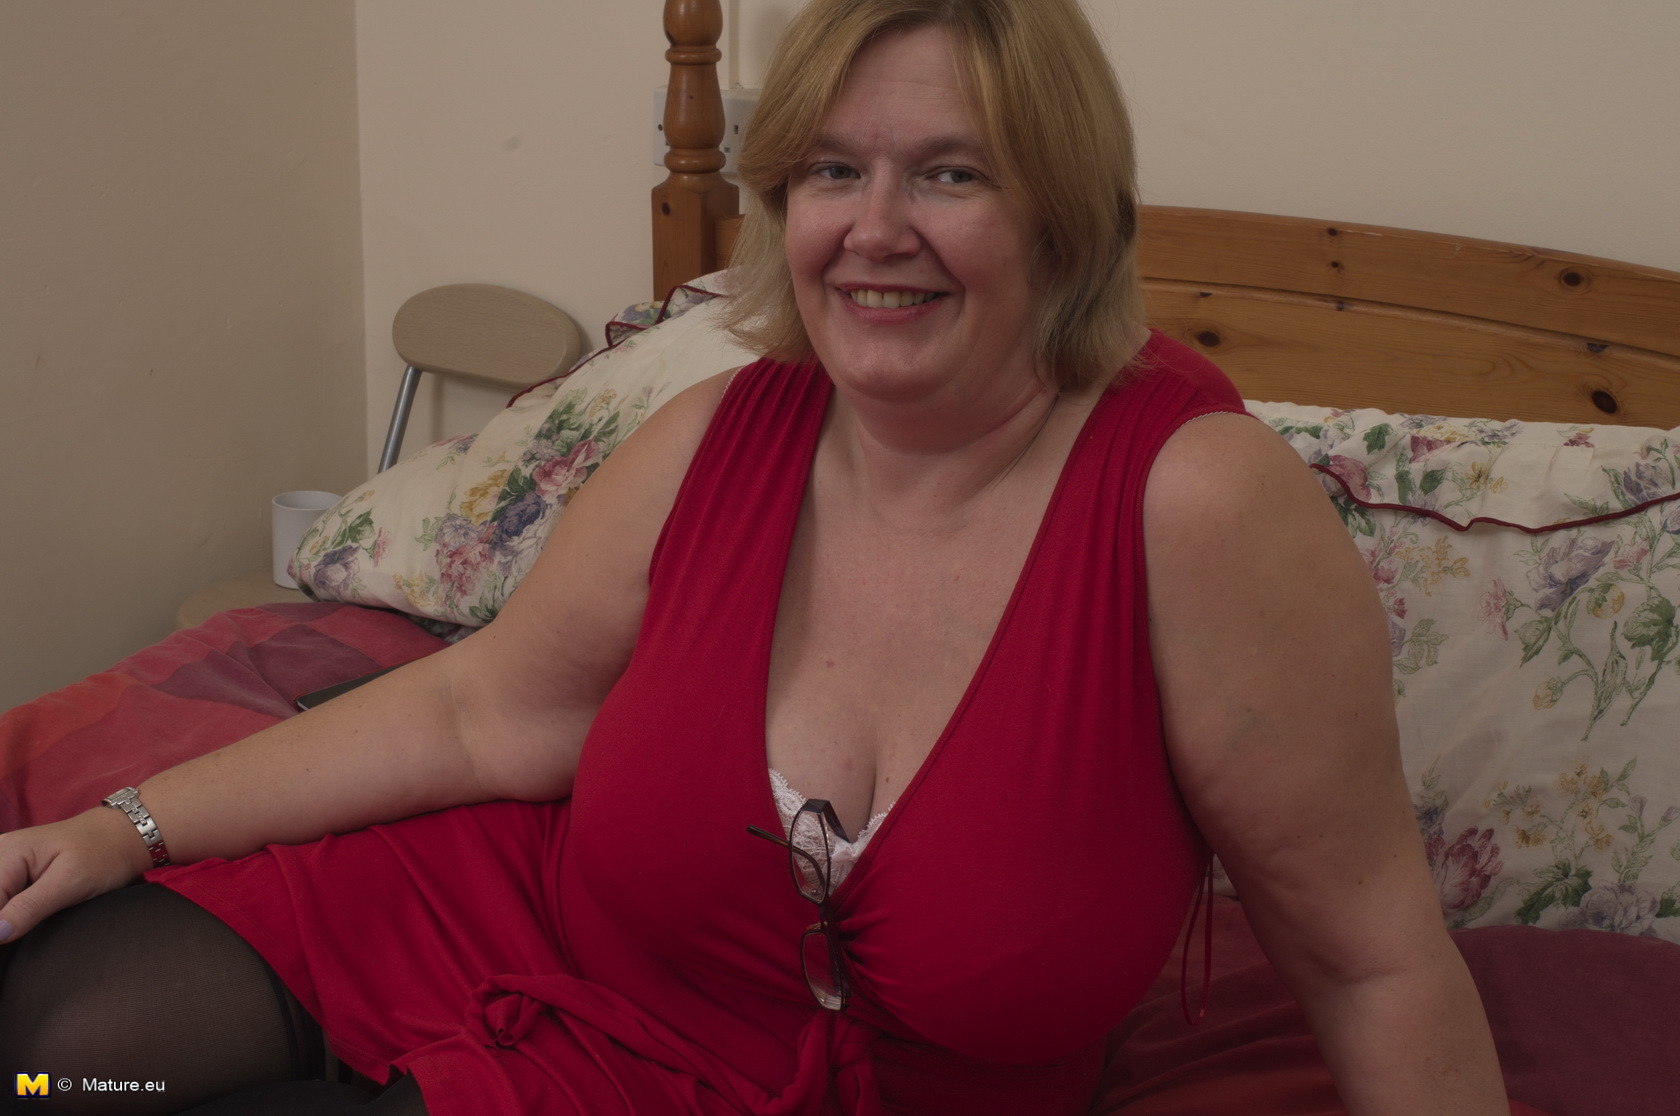 Large British mature lady with big natural tits getting dirty #71728173